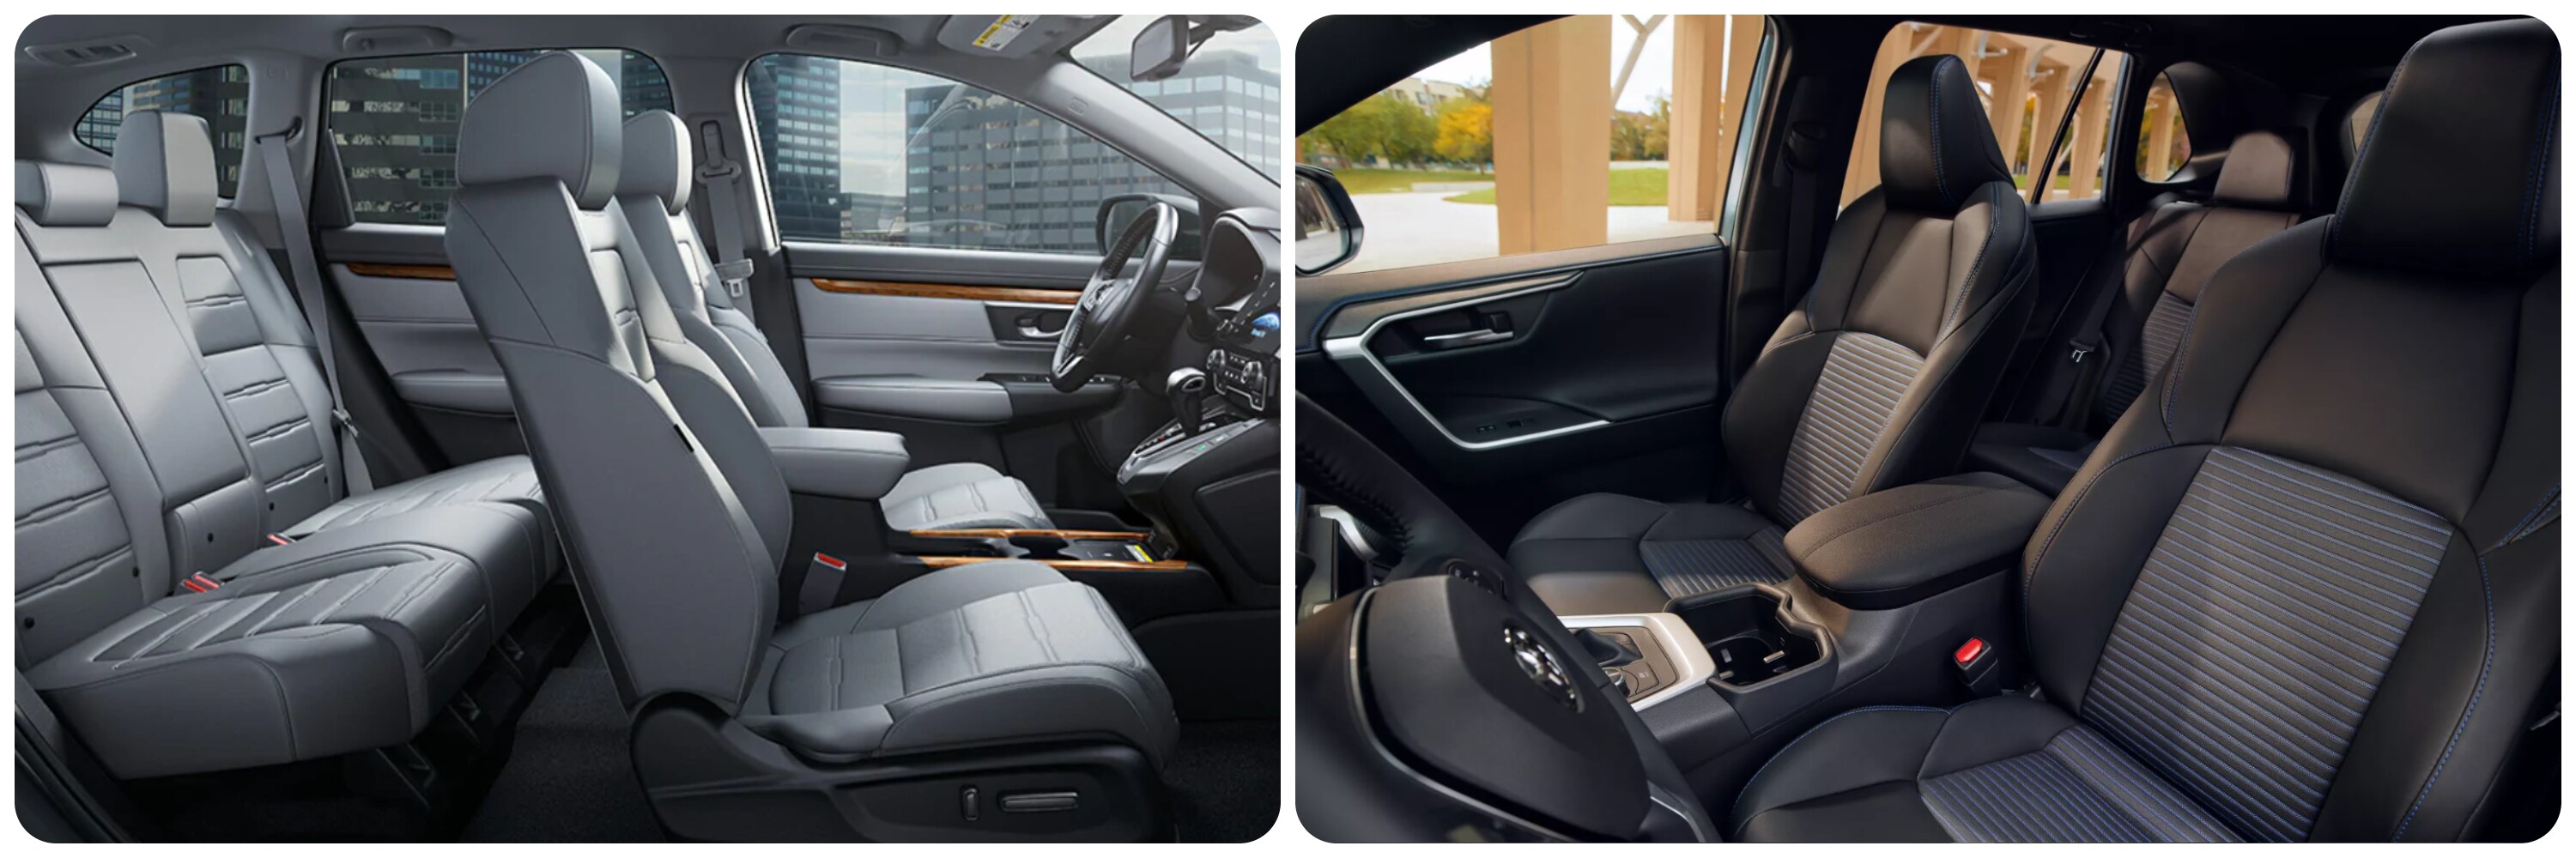 On the left a view of the cabin and seating of a 2022 Honda CR-V and on the right a view of the first row of seating in a 2022 Toyota RAV4